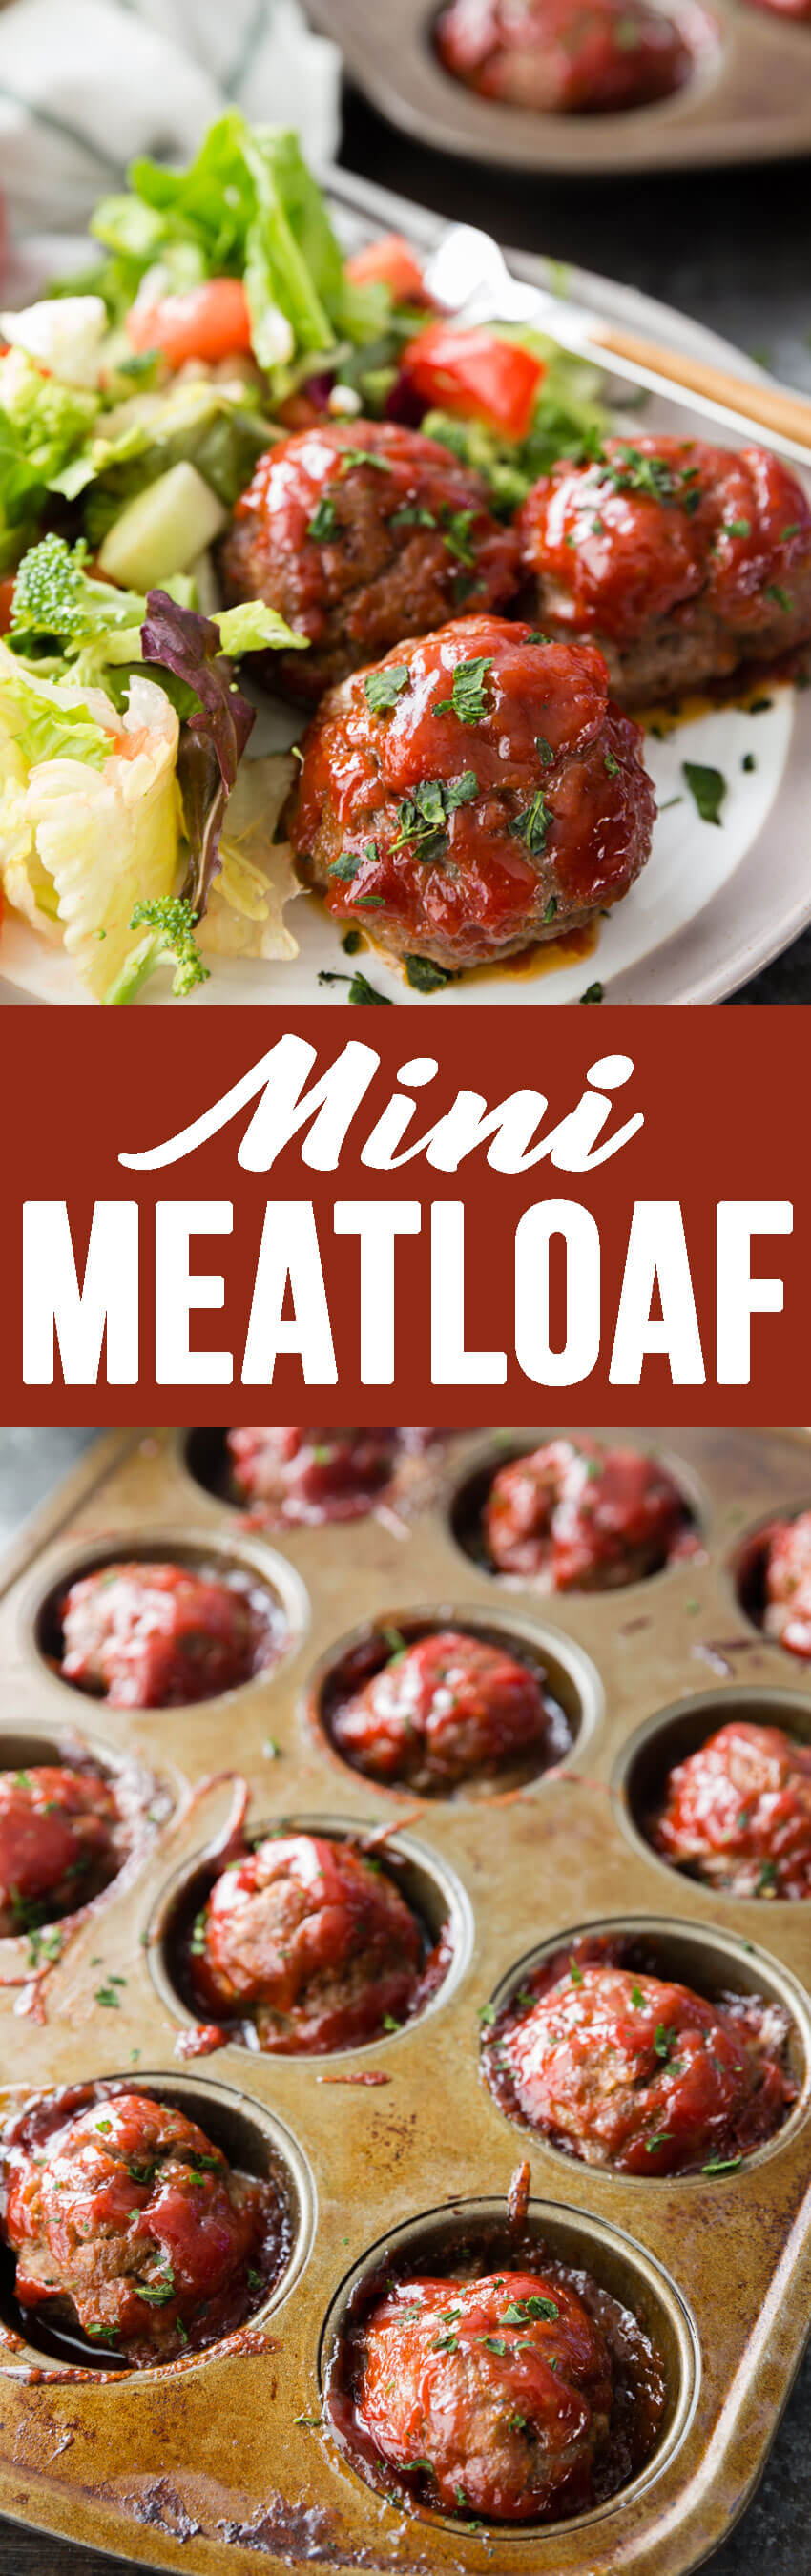 Freezer Meal Meatloaf Minis that are packed with flavor, made in a muffin tin for thorough cooking and easy serving, and rivals any meatloaf out there!